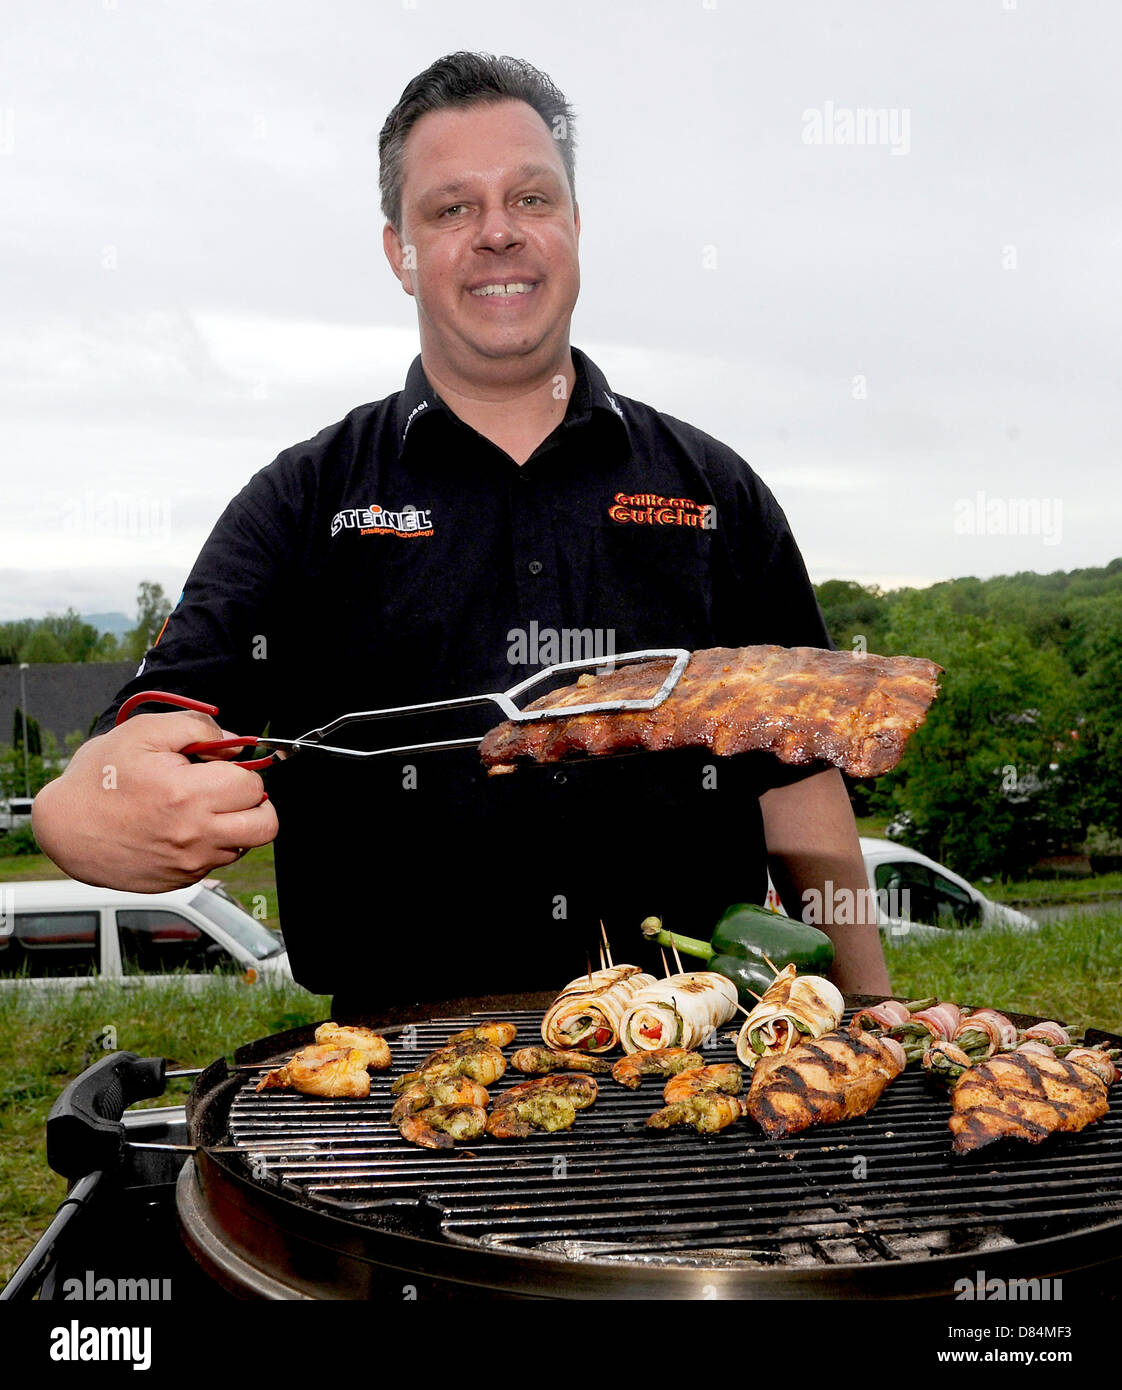 Michael Hoffmann, team boss of Grillteam Gut Glut e.V., presents spare ribs on his grill during the 18th German grill championship in Goeppingen, Germany, 19 May 2013. Hoffman succeeds in defending his championship title from former year, among 32 other teams. PHOTO: DANIEL MAURER Stock Photo